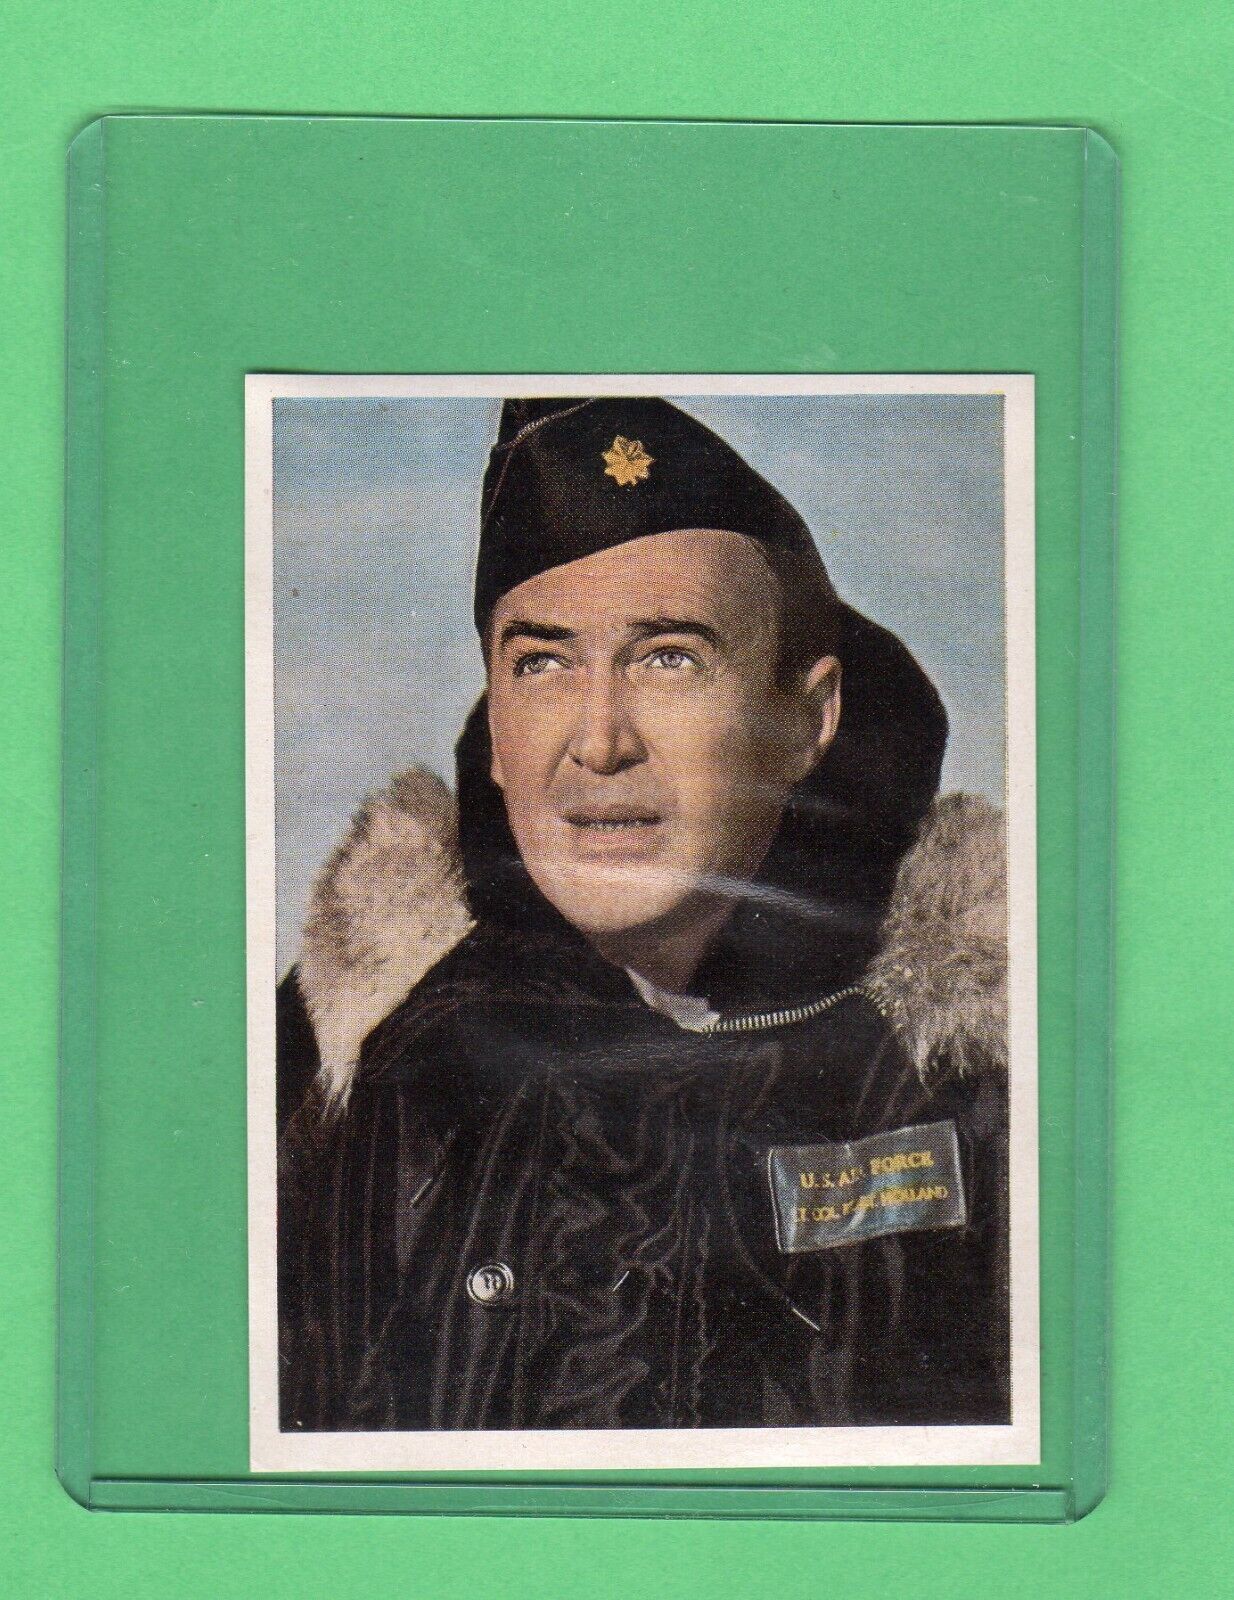 1956  James Stewart  German   Newly discovered Issue  Very Rare